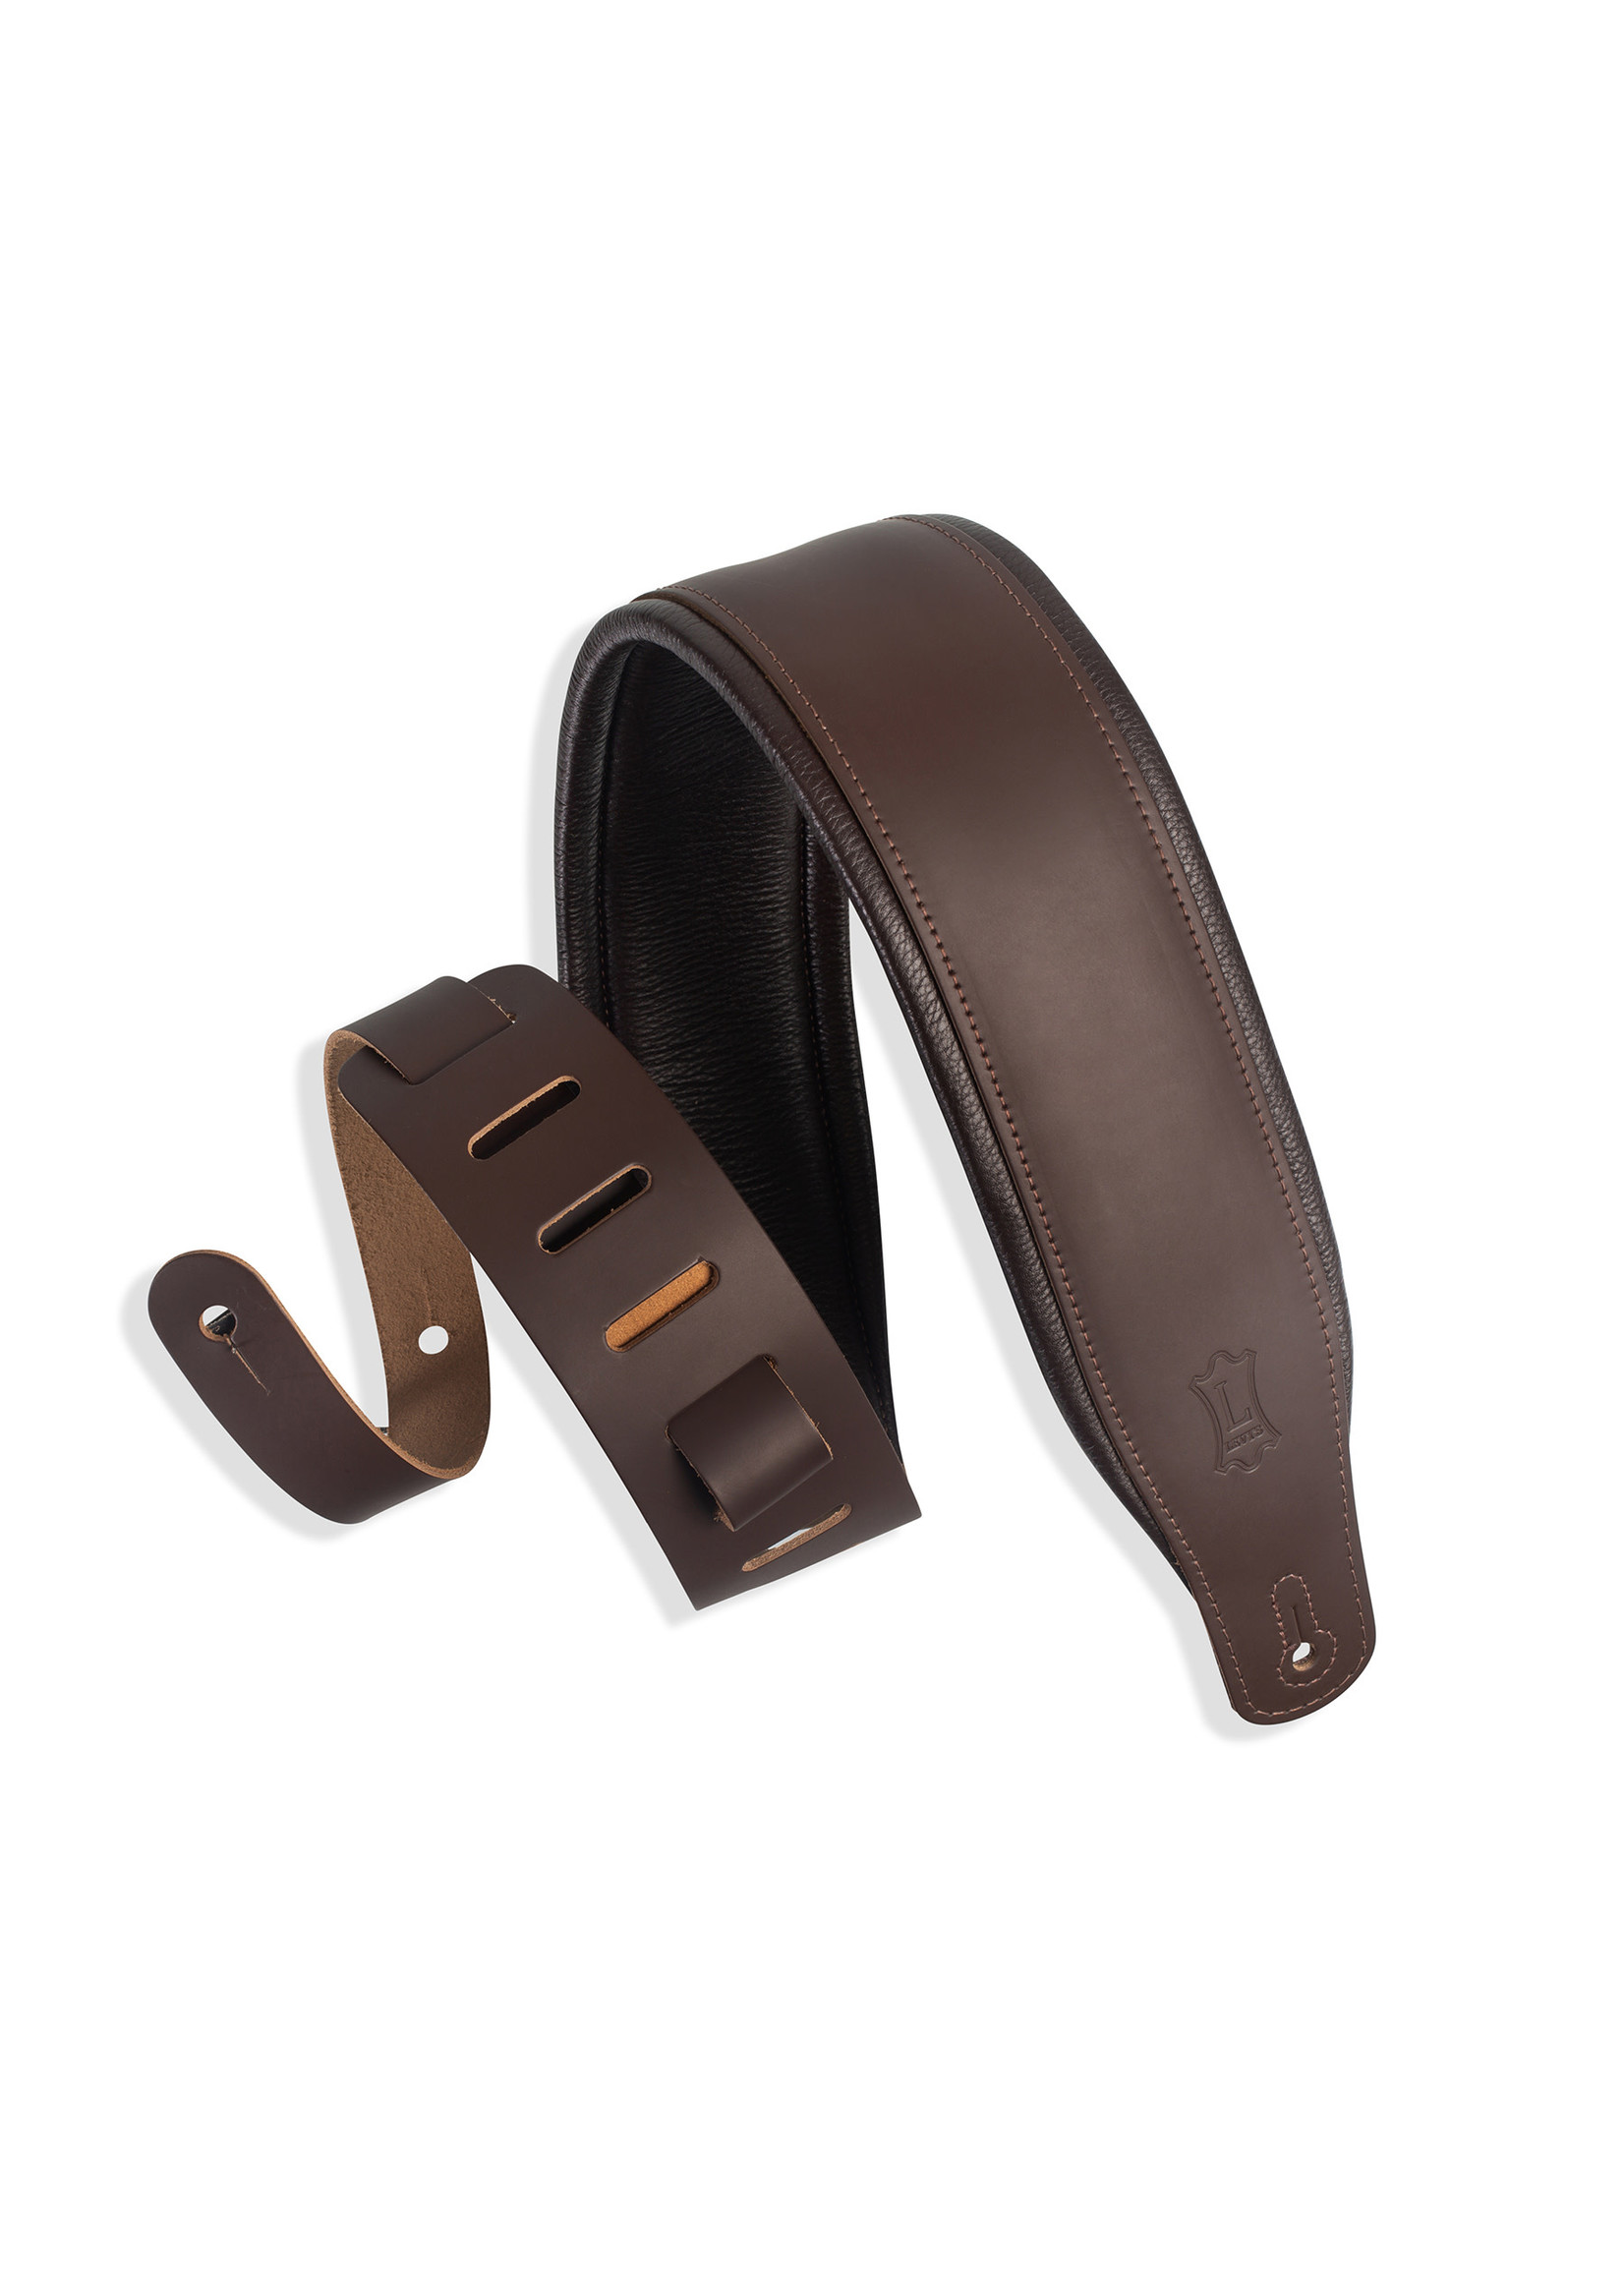 Levy's Levy's Guitar Strap Classic Series Favourite Padded Leather M26PD